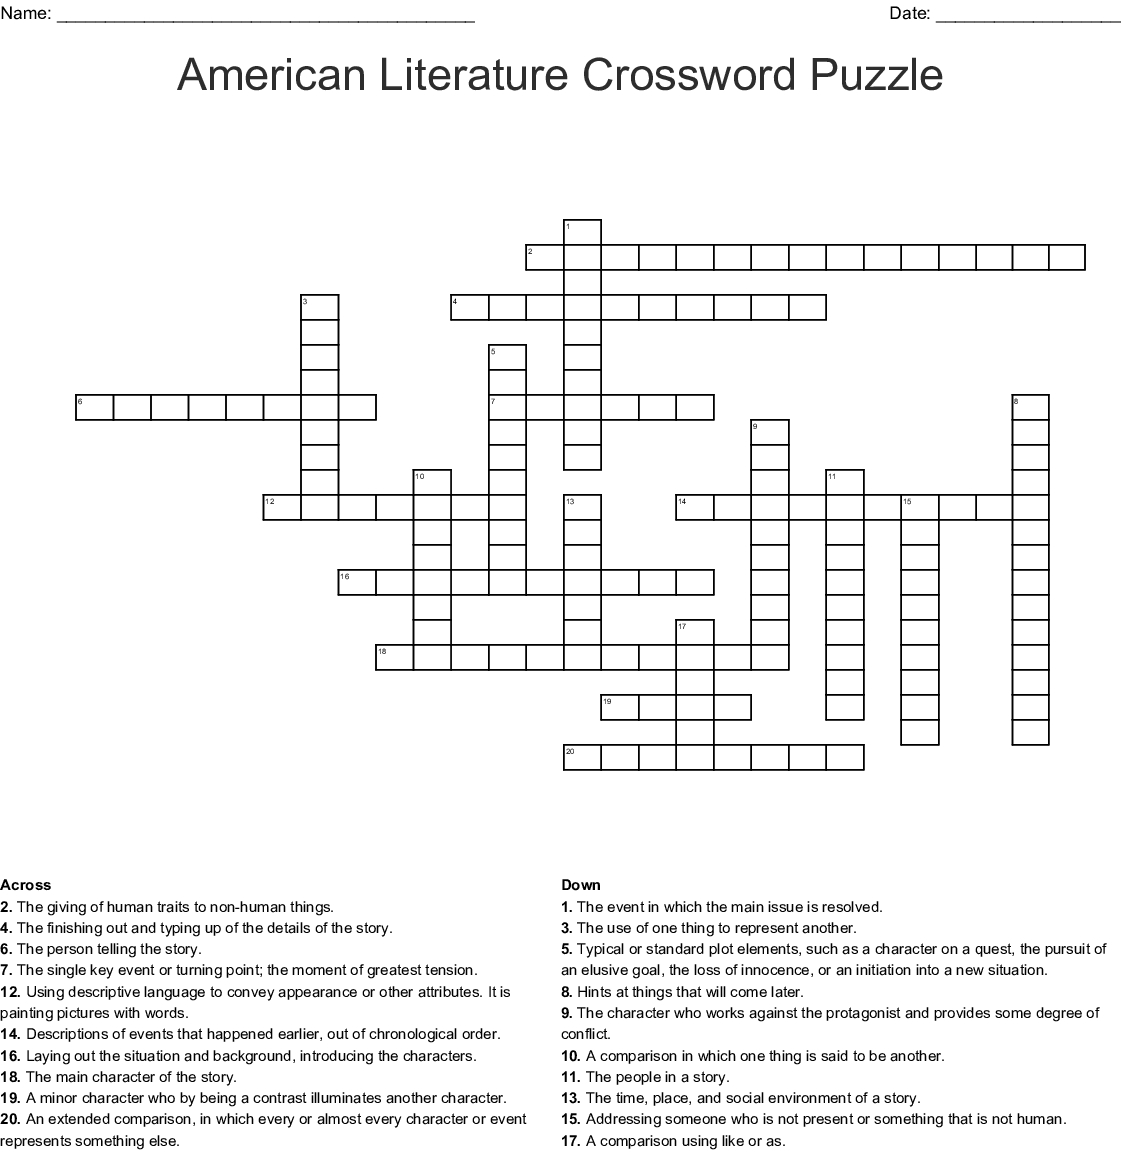 Bloomsday Literary Crossword Puzzles Printable